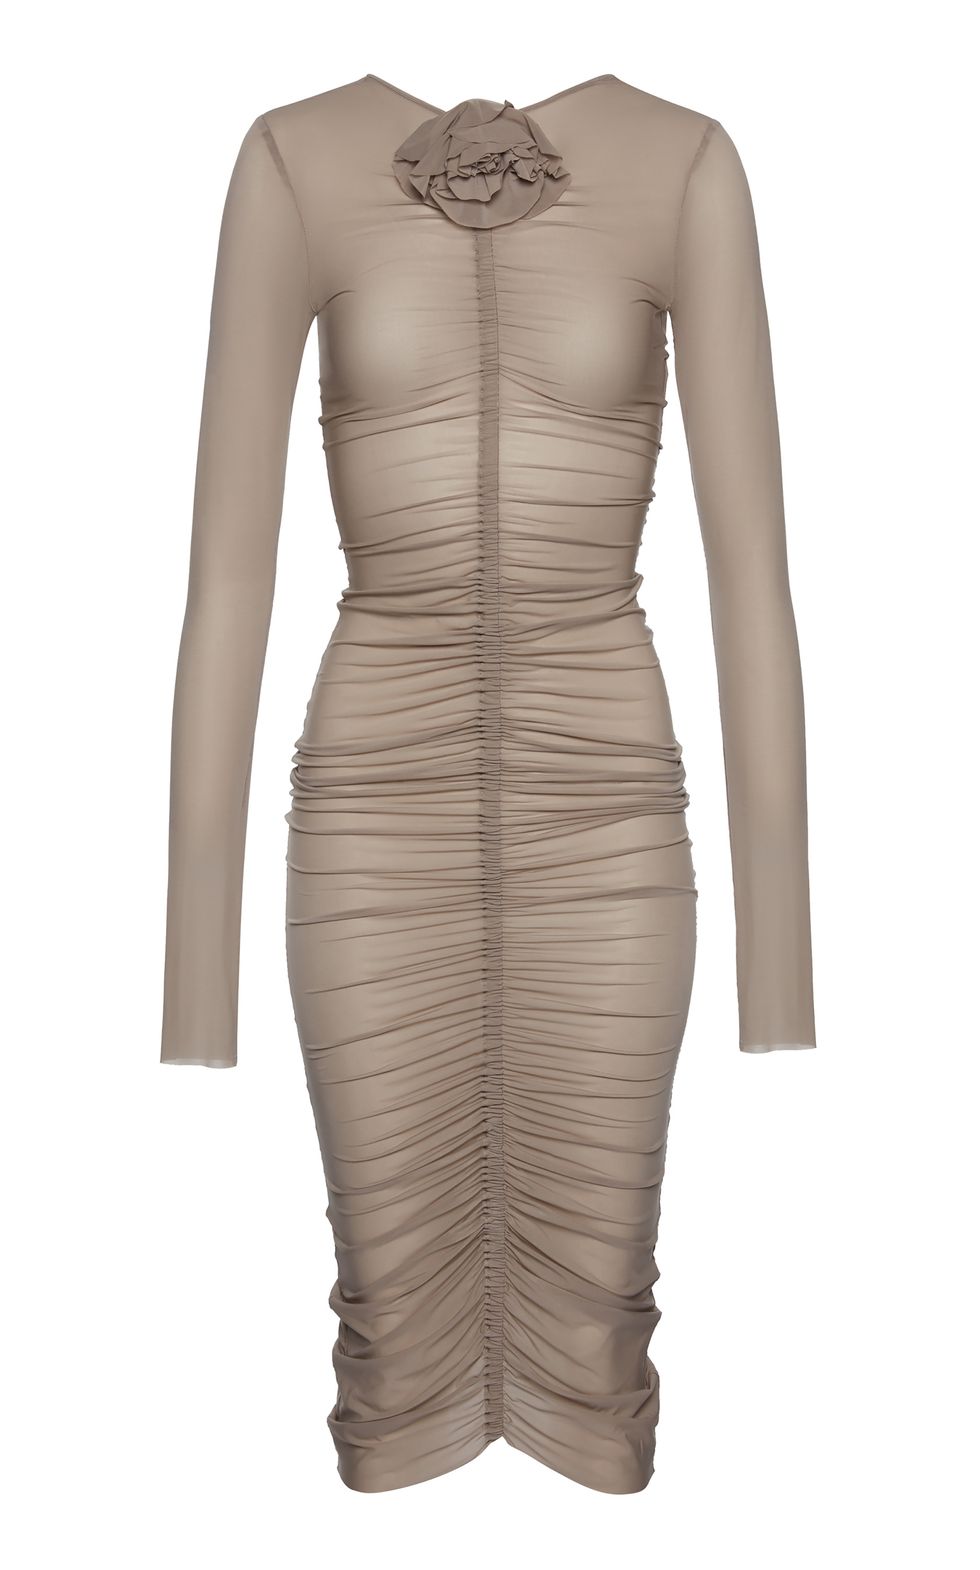 Femme Luxe ruched corset bodycon midi dress in tan